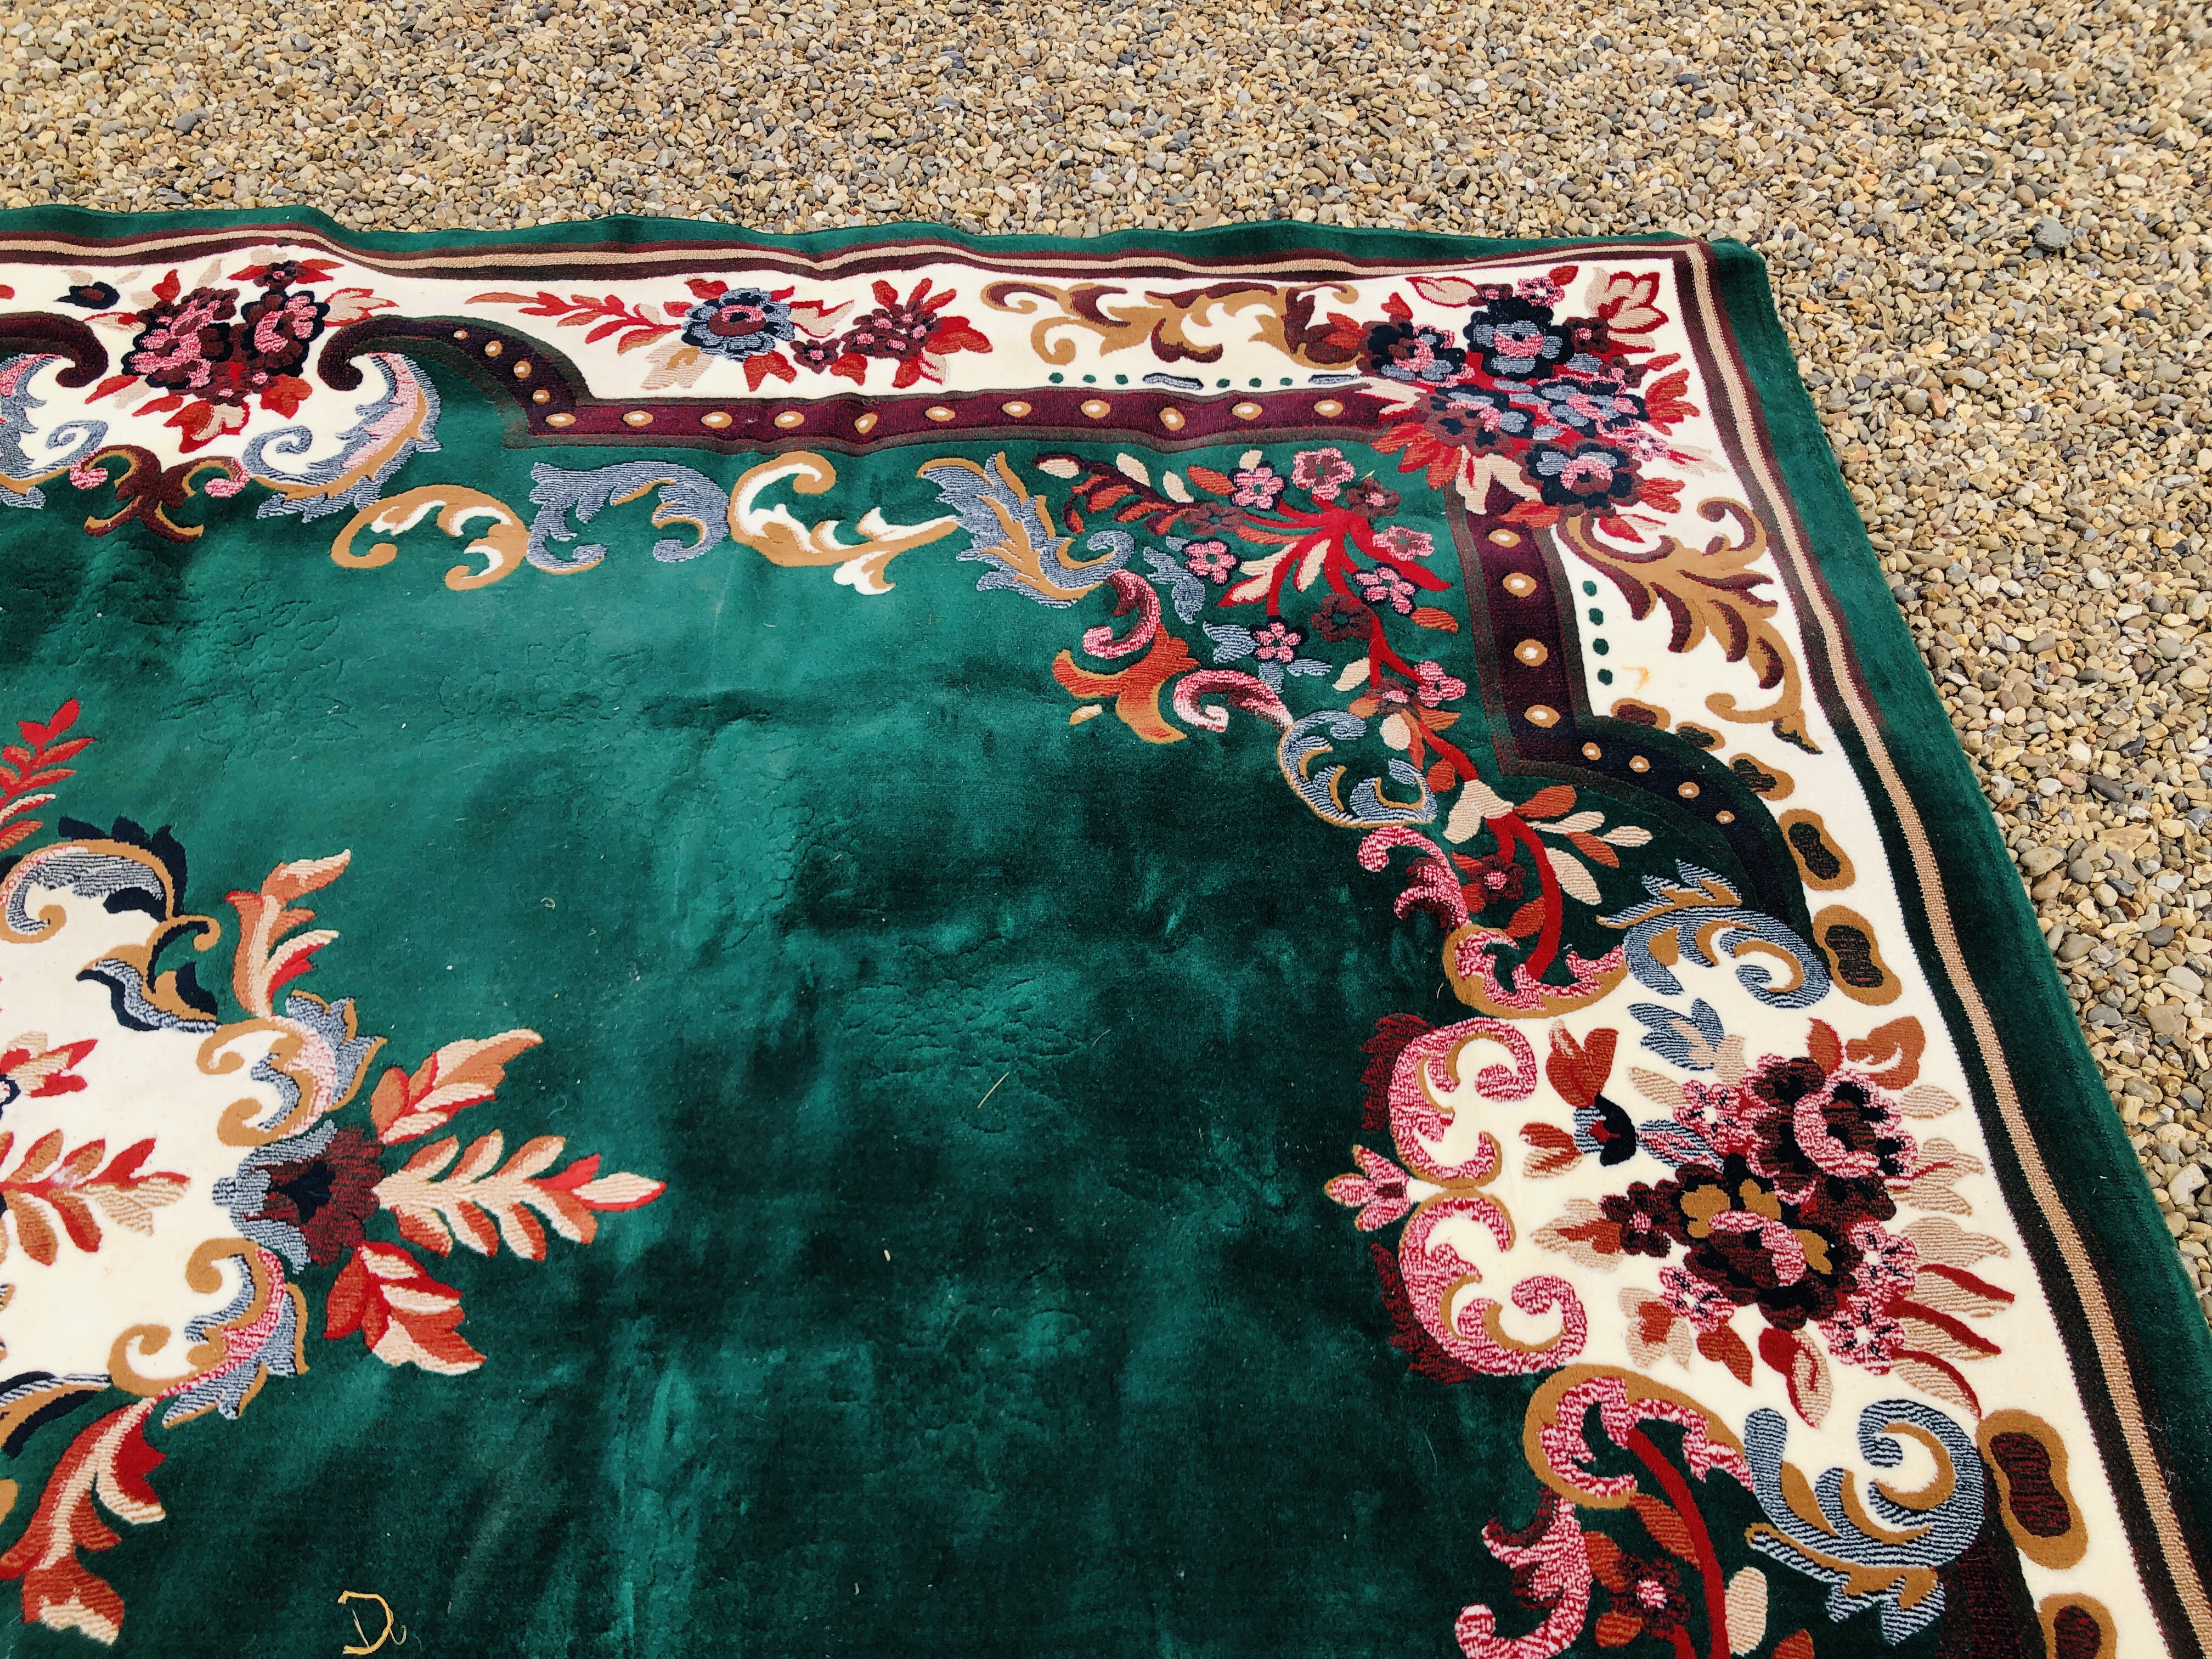 A MODERN CHINESE GARDEN CARPET SQUARE IN EMERALD GREEN 380/280. - Image 3 of 7